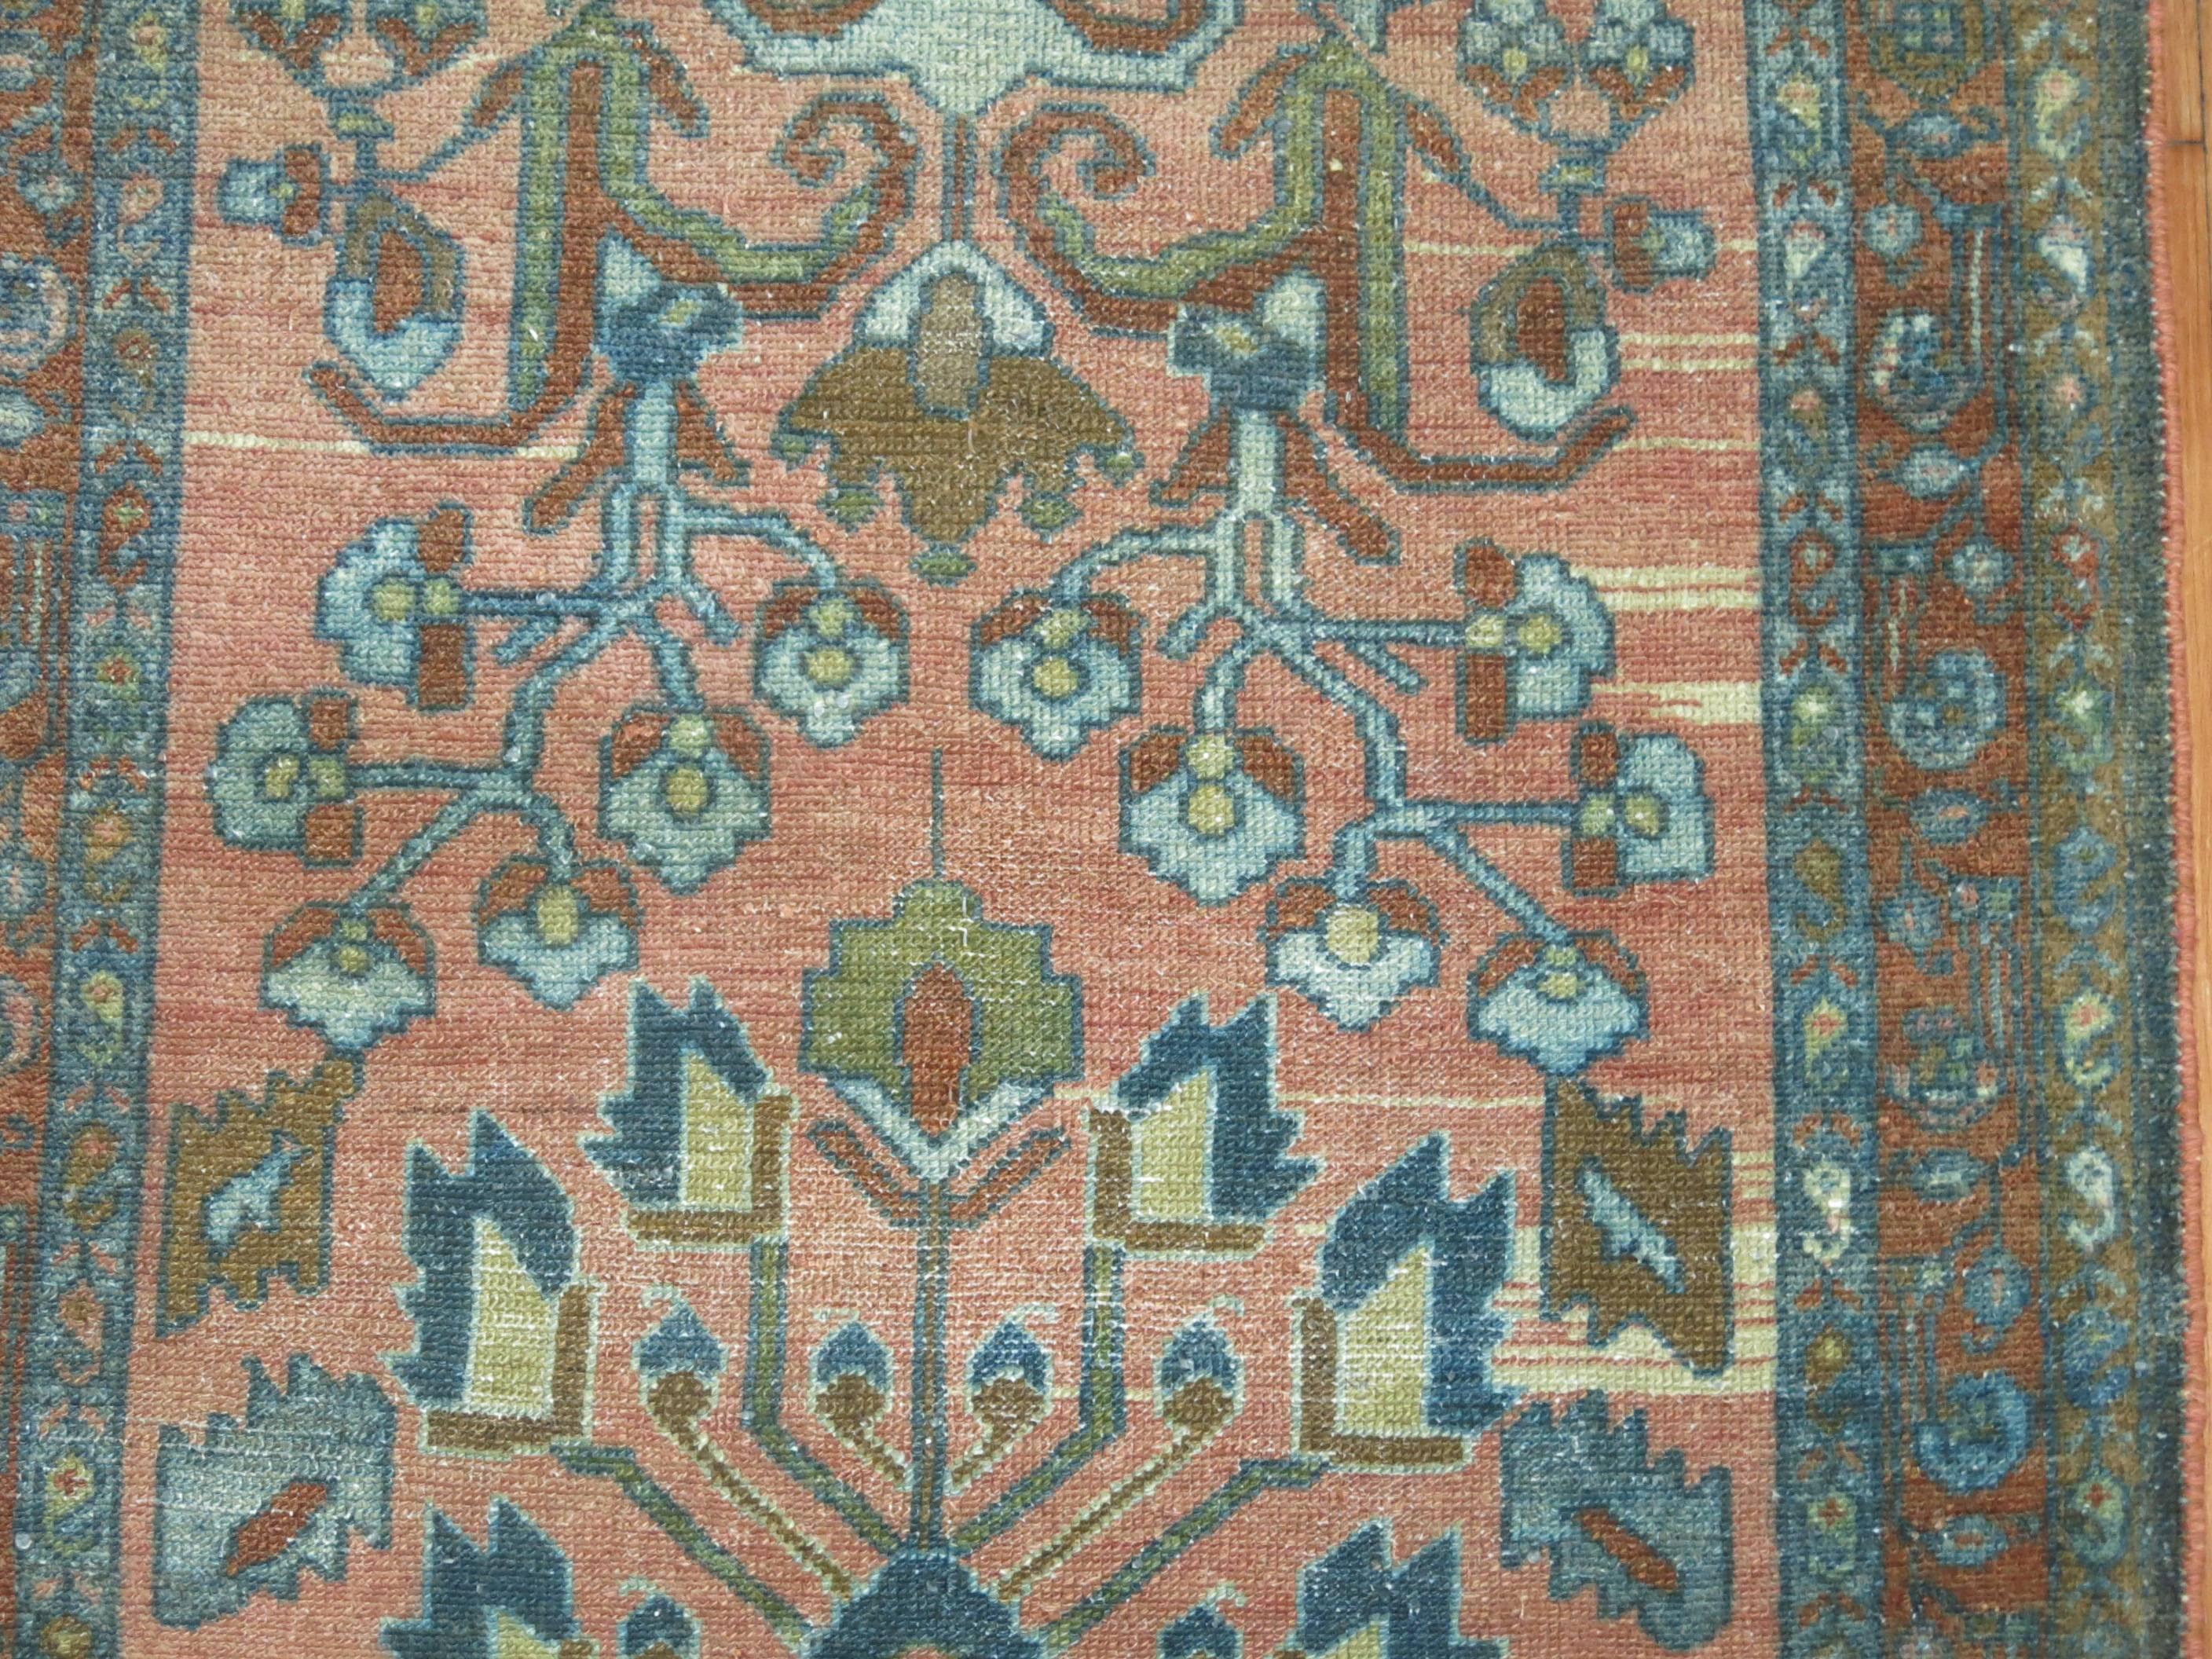 Antique Persian runner with a muted formal palette.